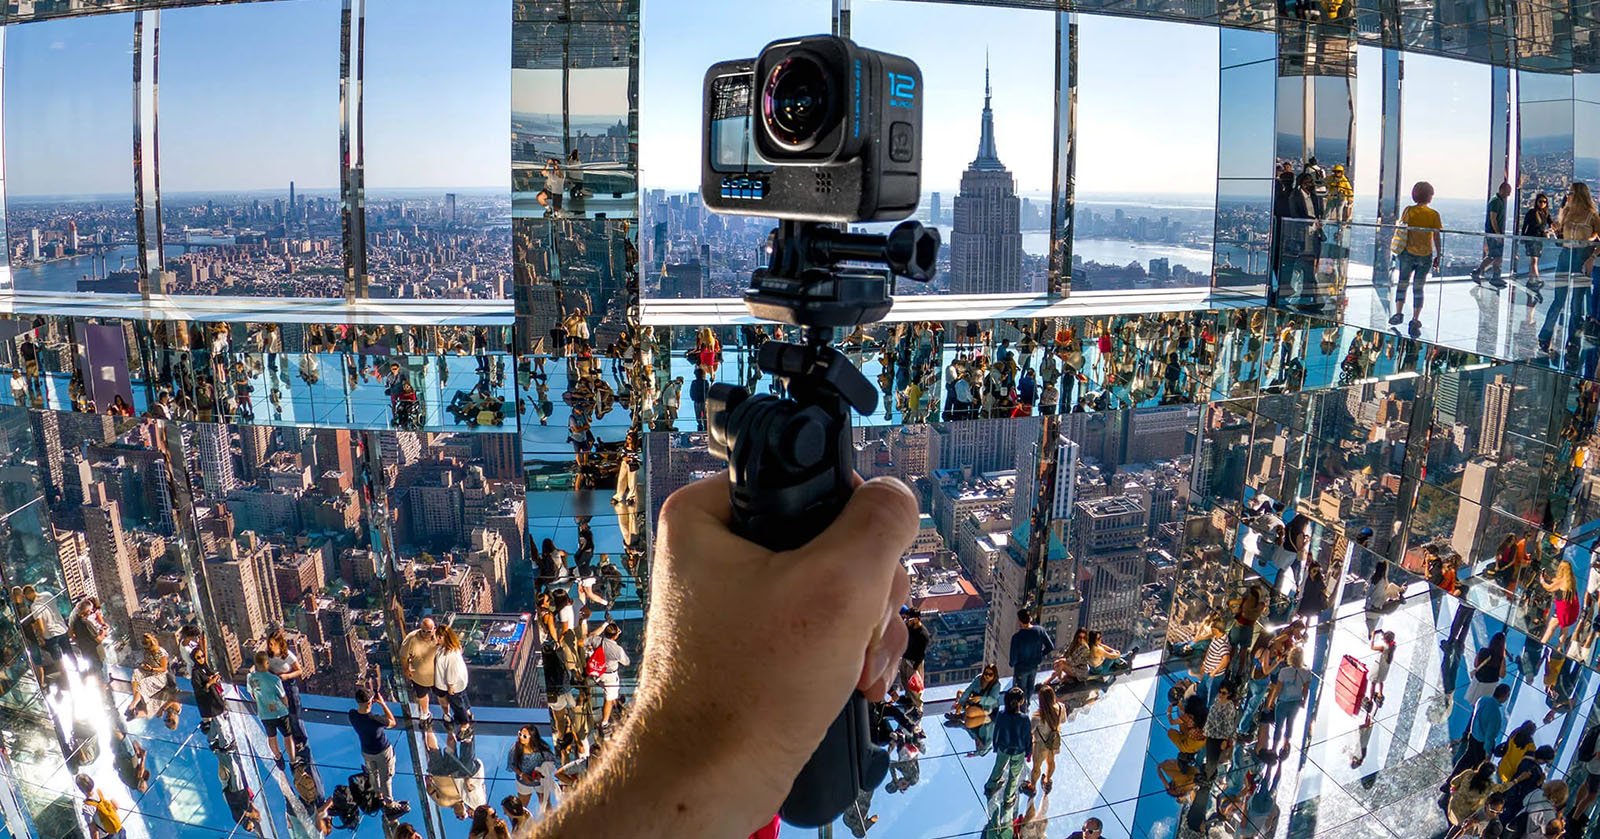  gopro annual subscriptions add many perks 